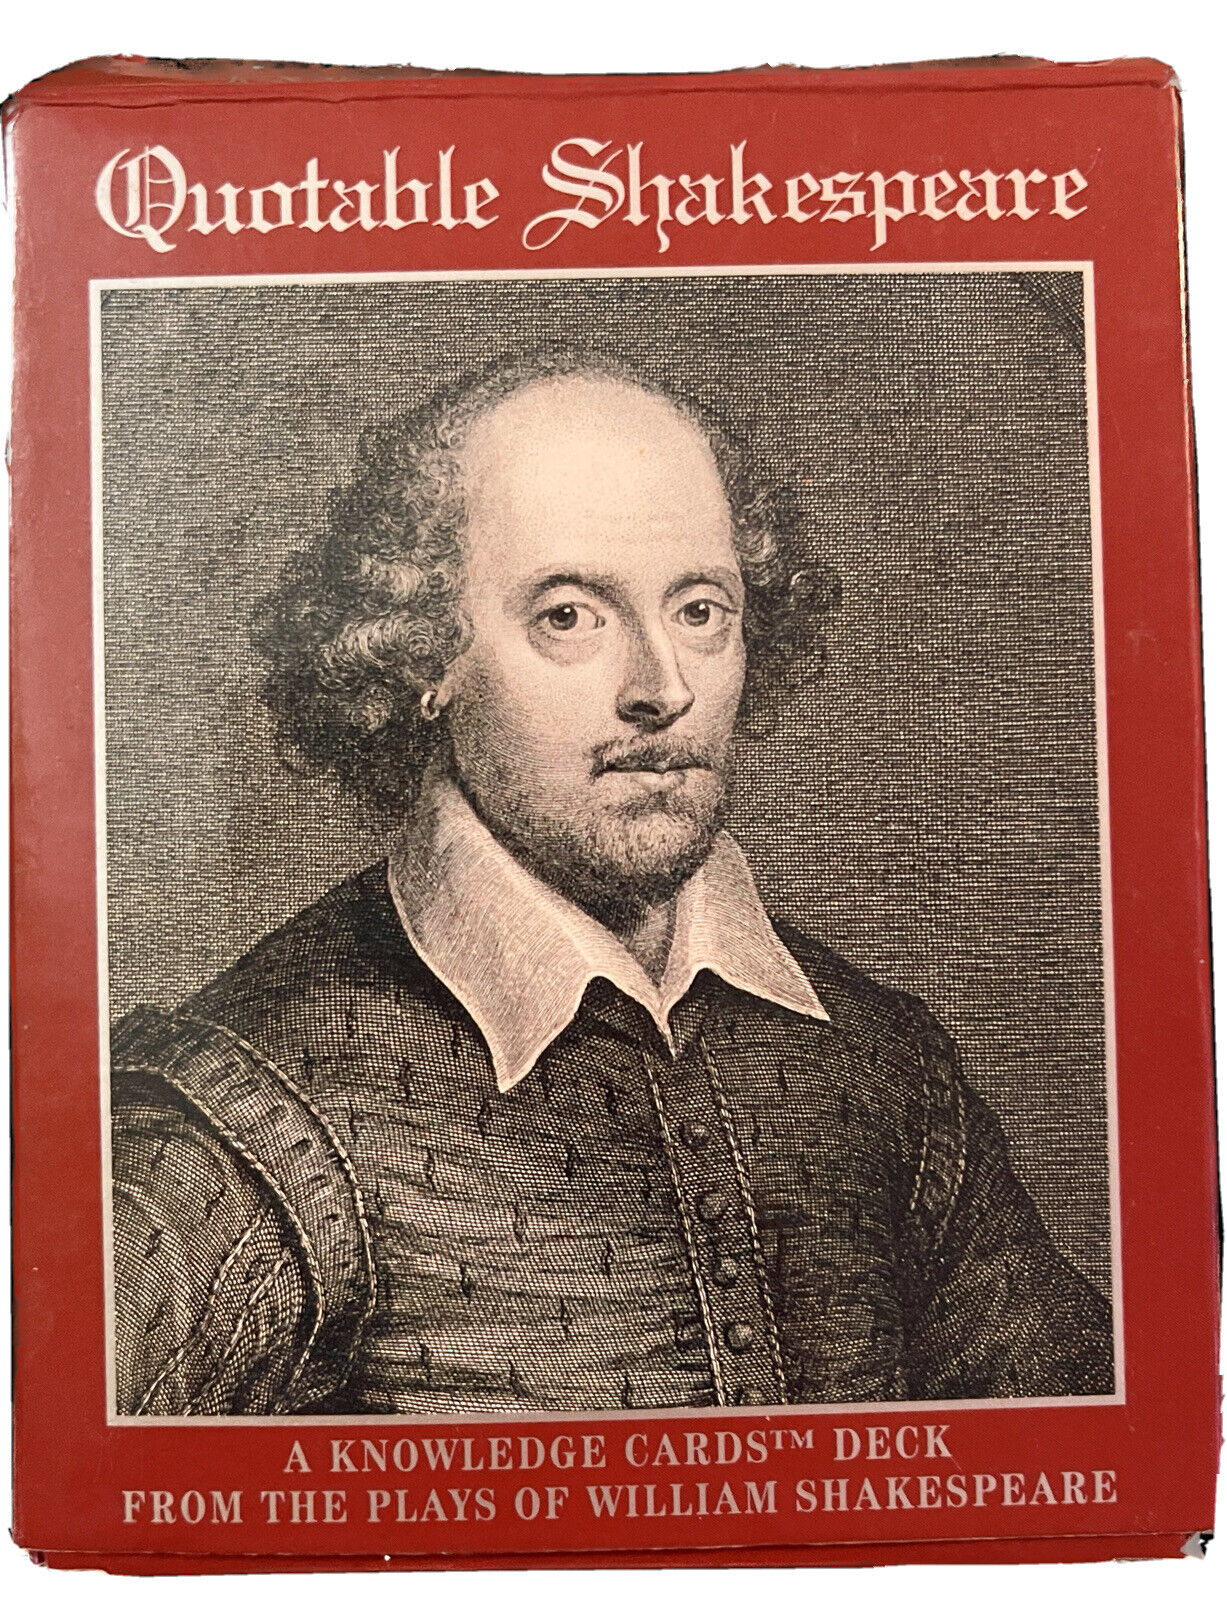 William Shakespeare -Quotable Shakespeare: A Knowledge Cards Deck from his Plays